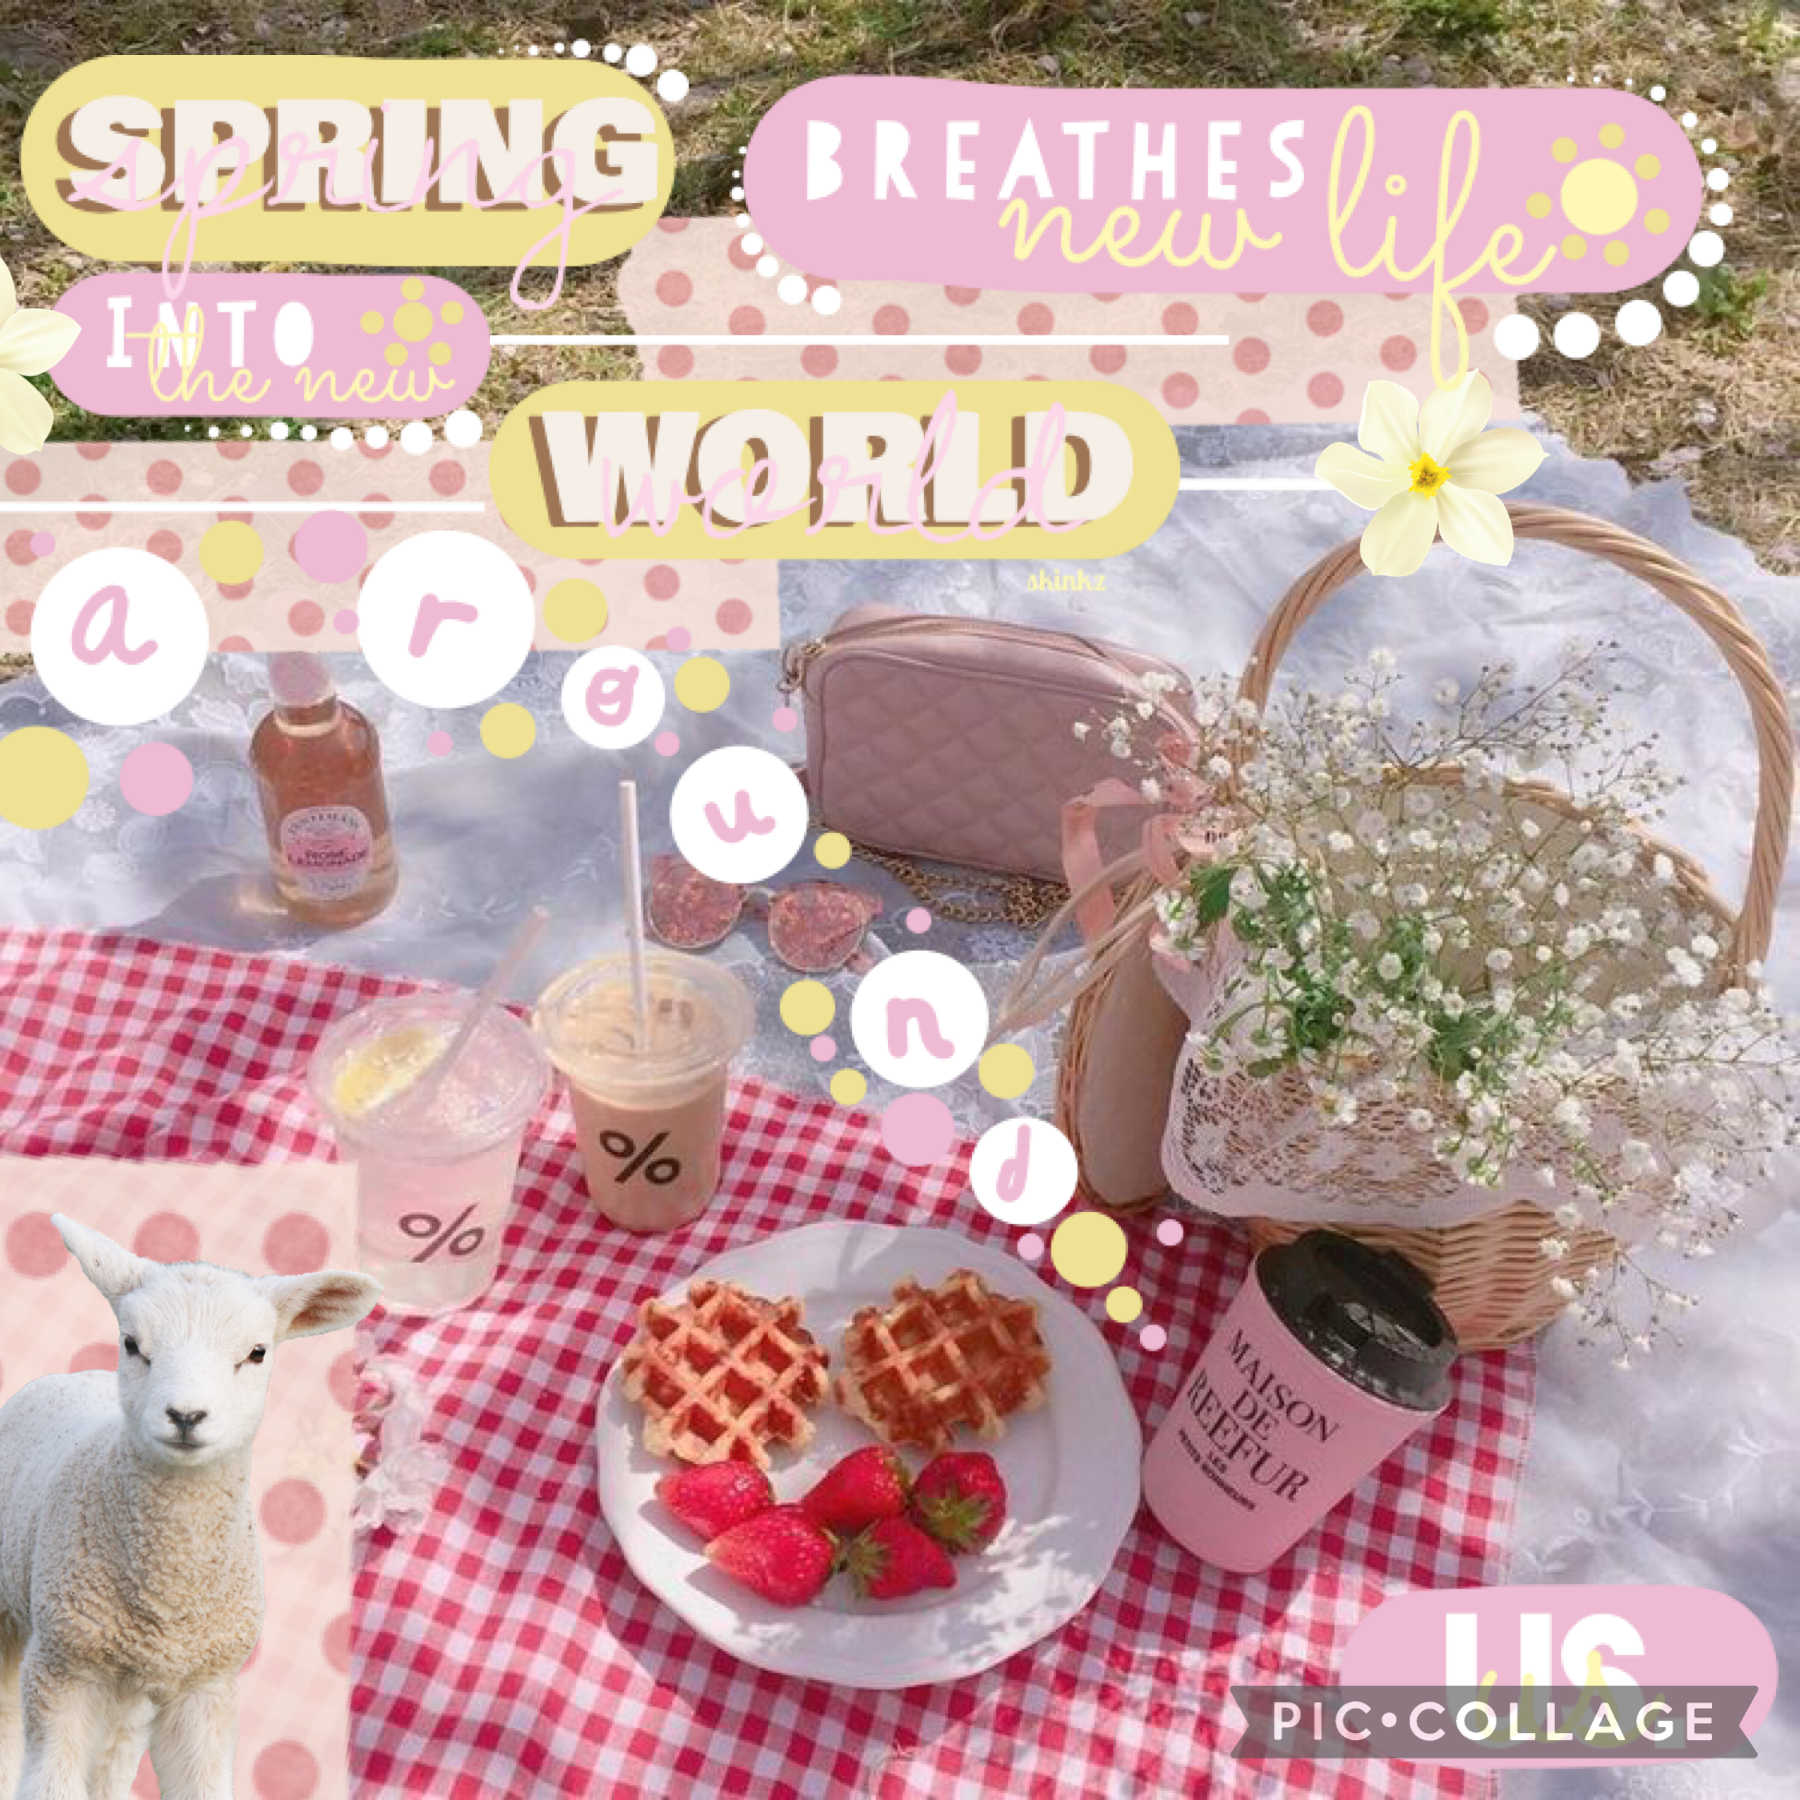 i really love the new spring sticker sets!

QOTD: what’s your favorite thing about spring?

AOTD: That winter is finally over lol!

#spring #springstickers #foryou #explorepage #piccollage #stickers #pastel 